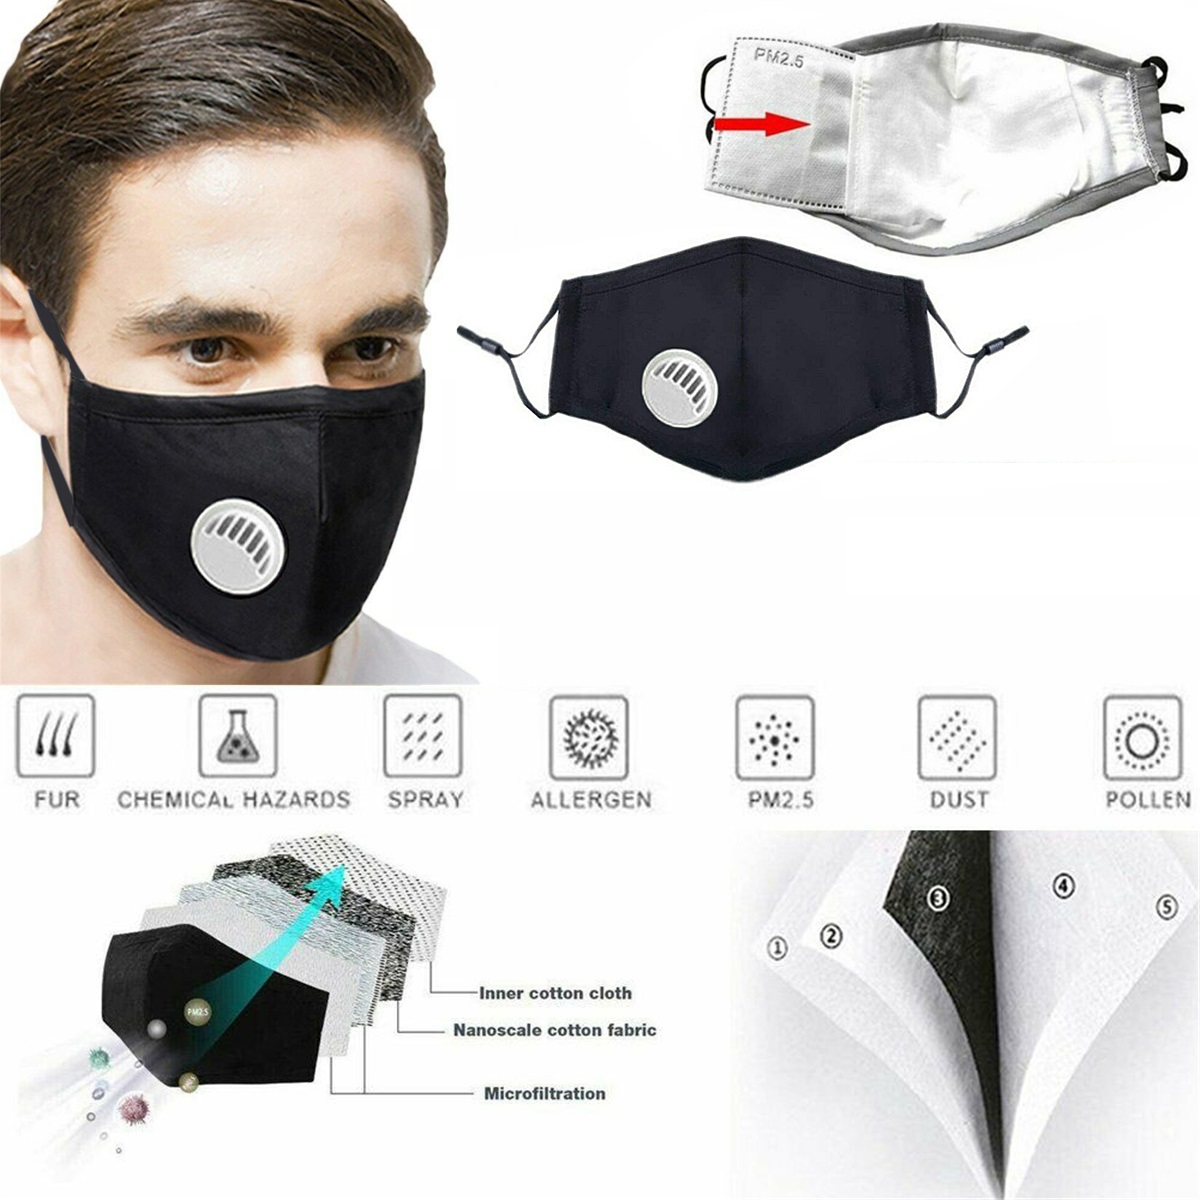 Air-Purifying-Face-Mask-in-Cotton-PM25-Filter-Anti-Dust-Fog-Respirator-Washable-Mask-1714700-1